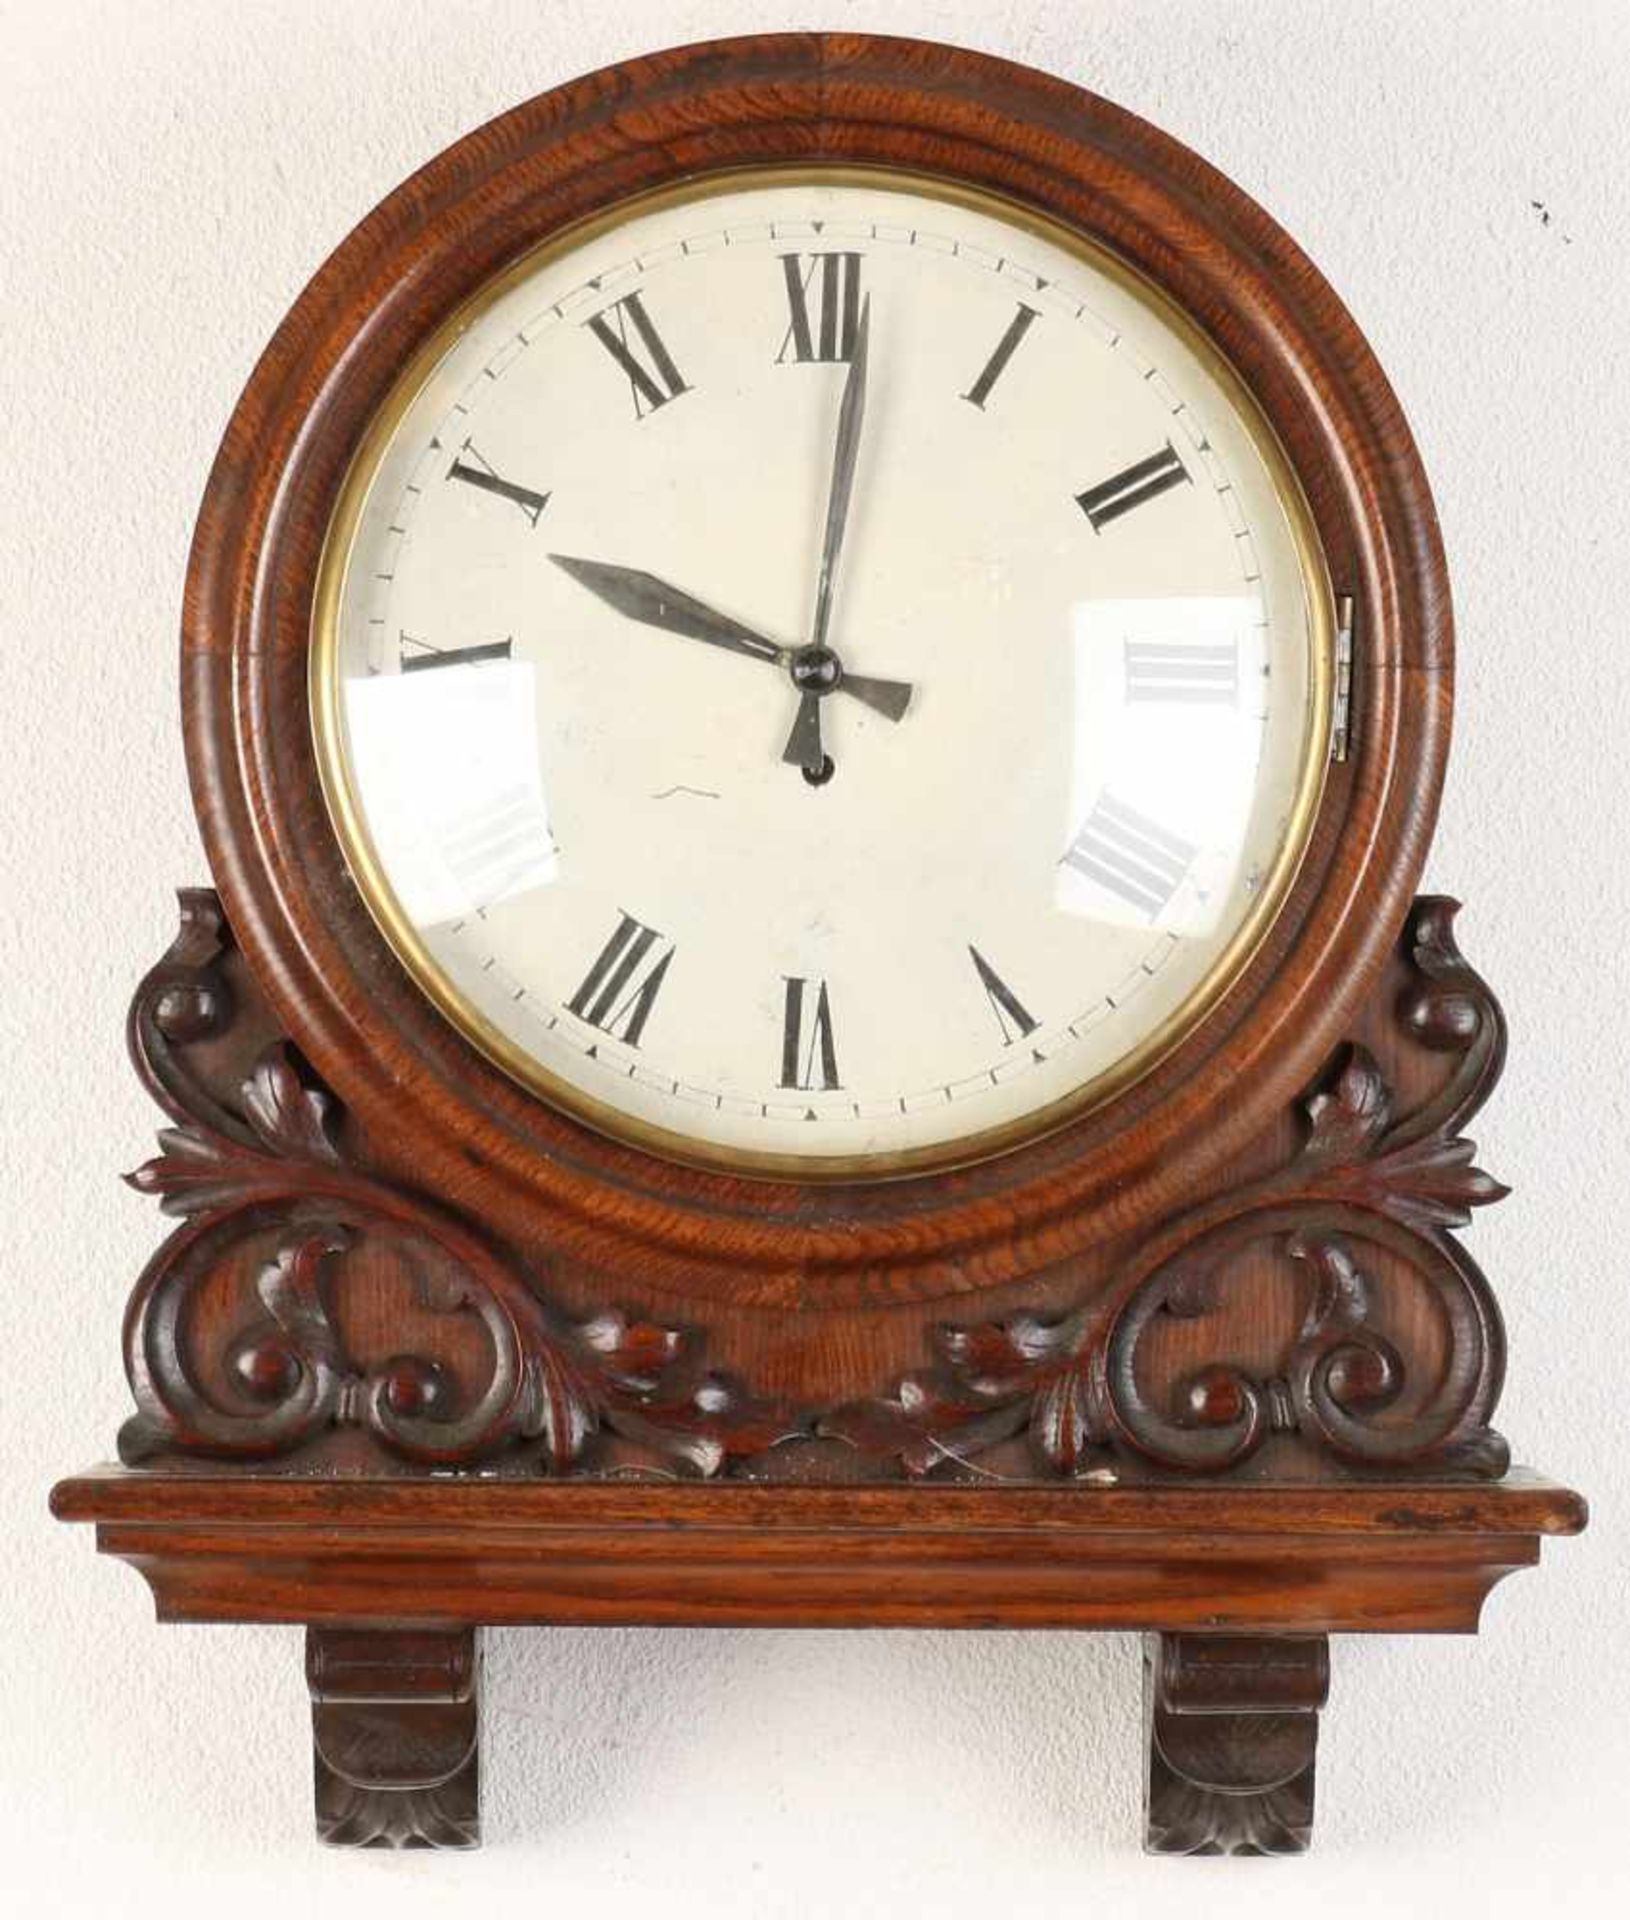 English oak Victorian wall clock with fusee movement. Circa 1900. Size: 58 x 50 x 16 cm. In good